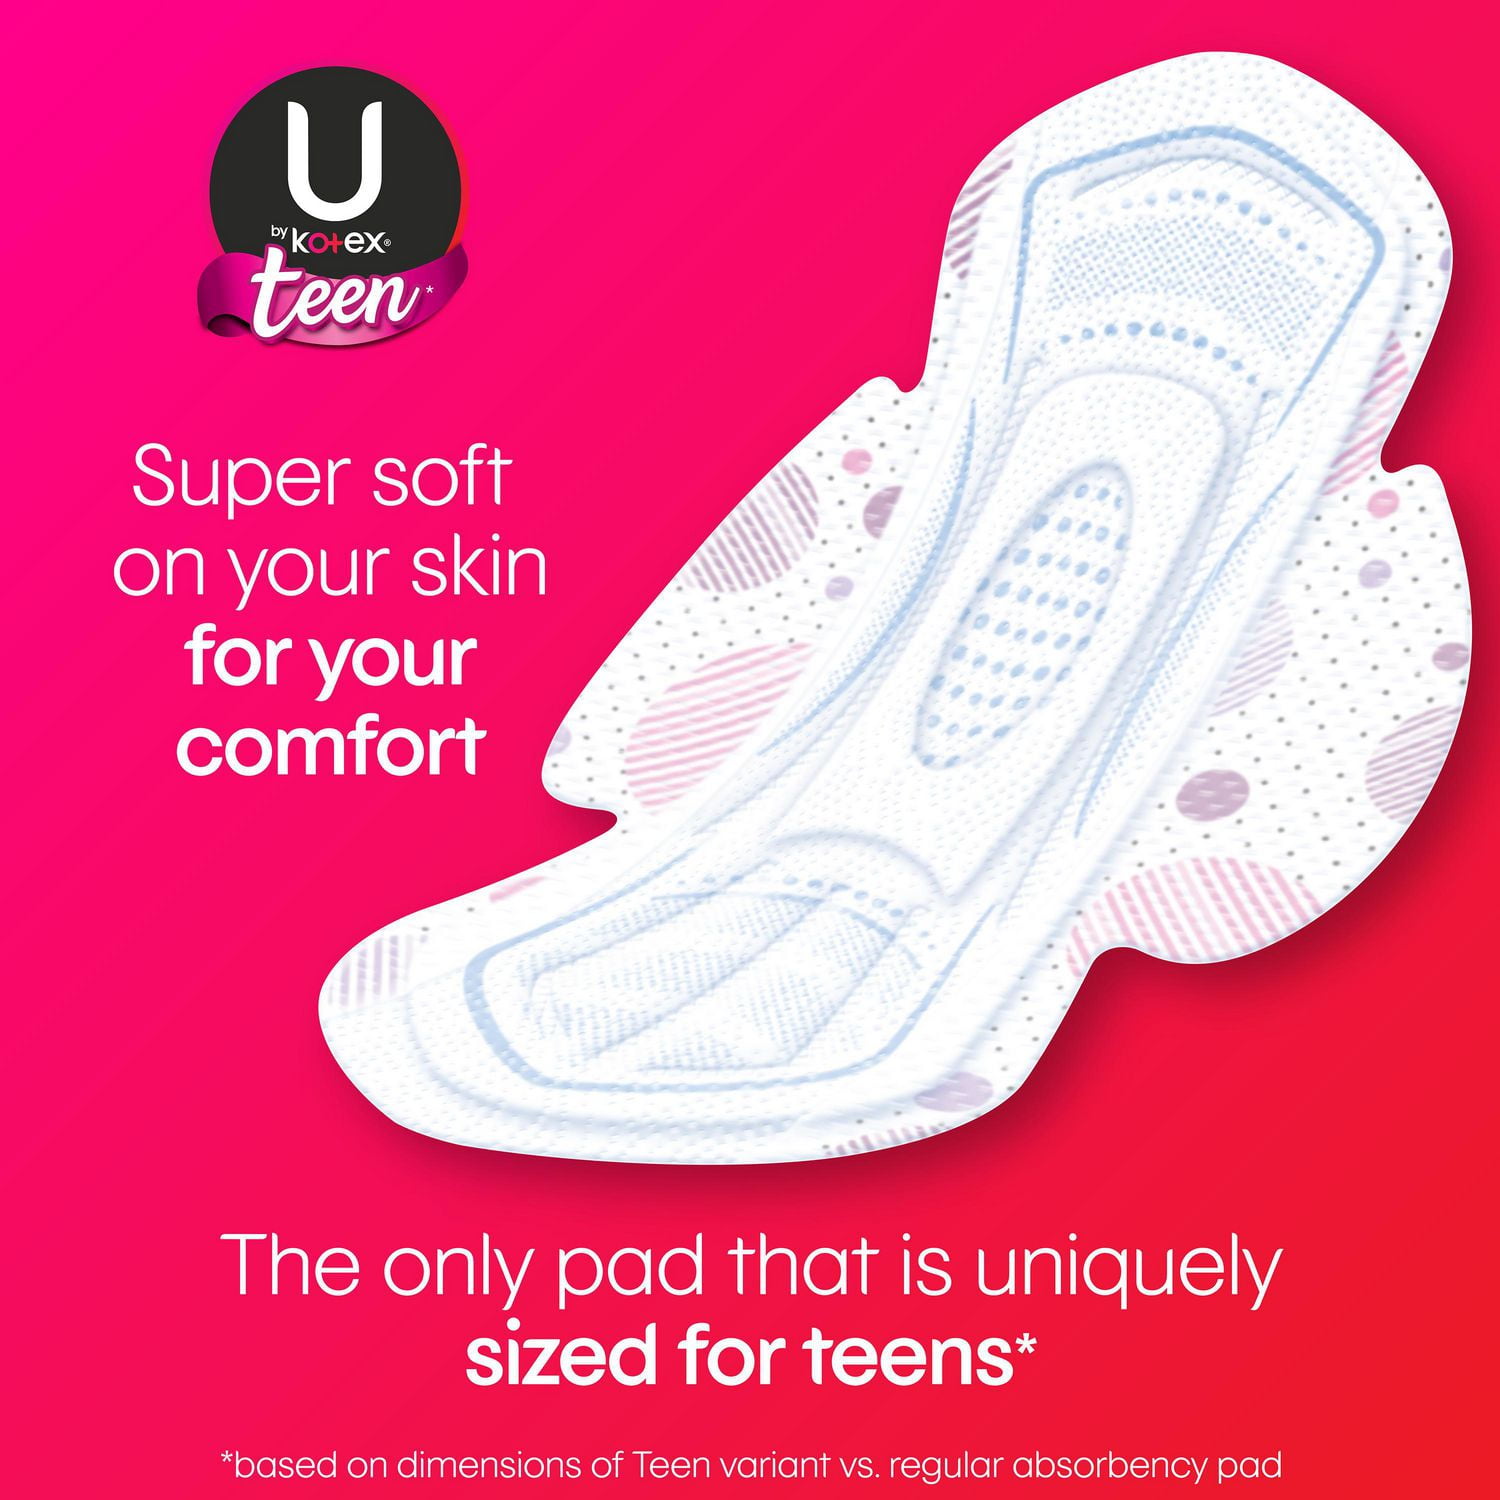 U by Kotex Ultra Thin Teen Pads with Wings, Extra Absorbency, Unscented 